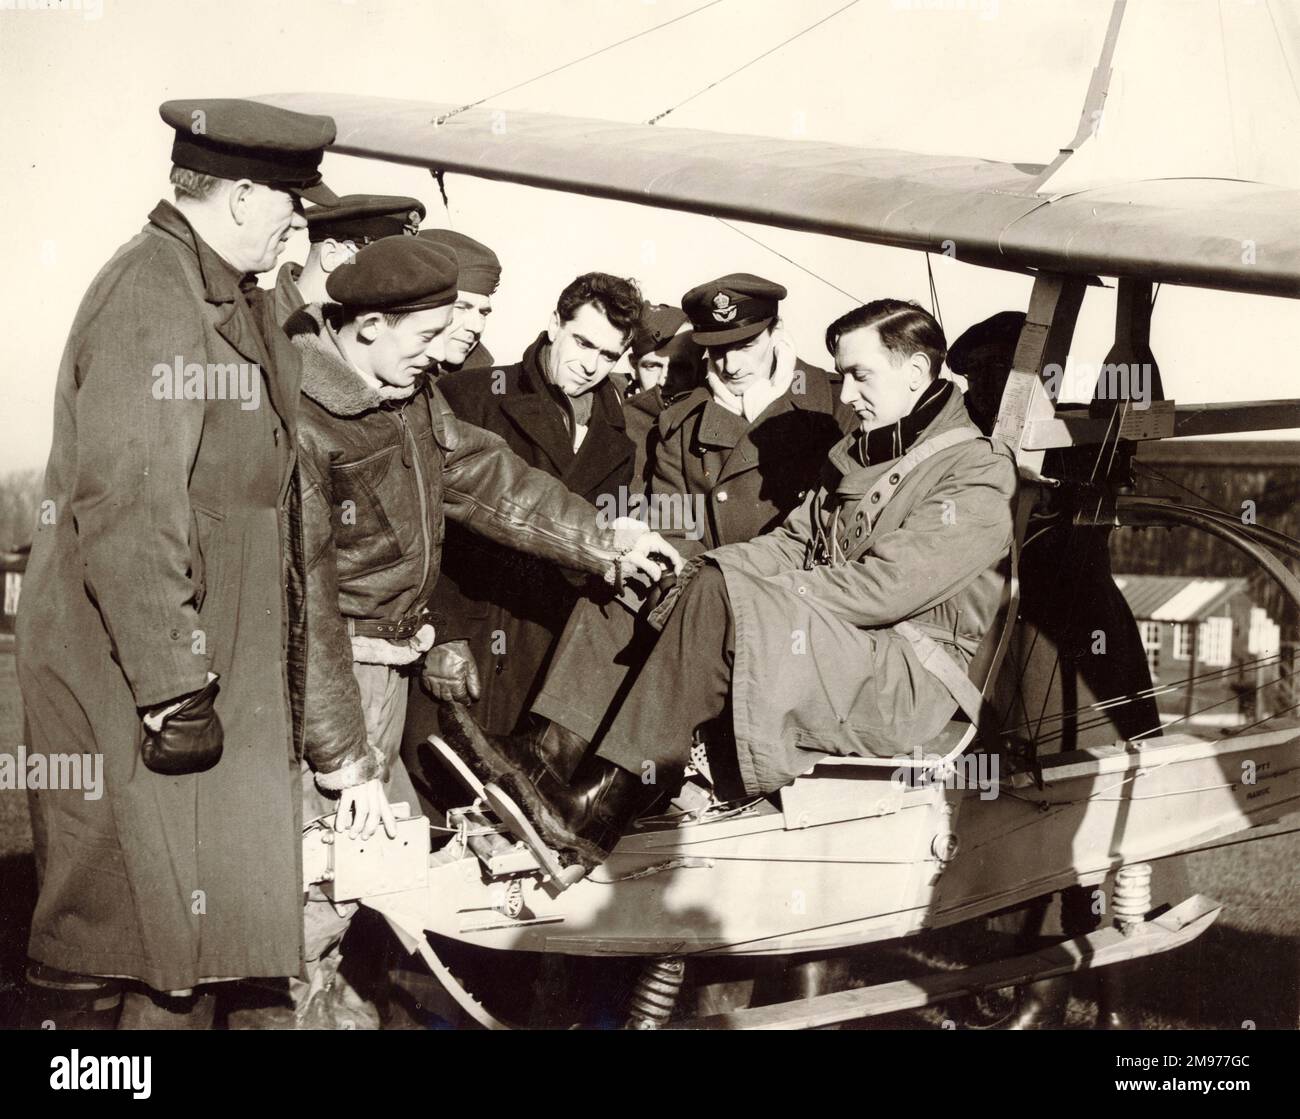 Flt Lt A.D. Piggott, the chief instructor, with a class of schoolmasters, explains the controls of a glider at Detling, near Maidstone, Kent. In the cockpit is J.L. Smith, chemistry master from Dollar Acadamy, near Stirling, Scotland. 4 January 1952. Stock Photo